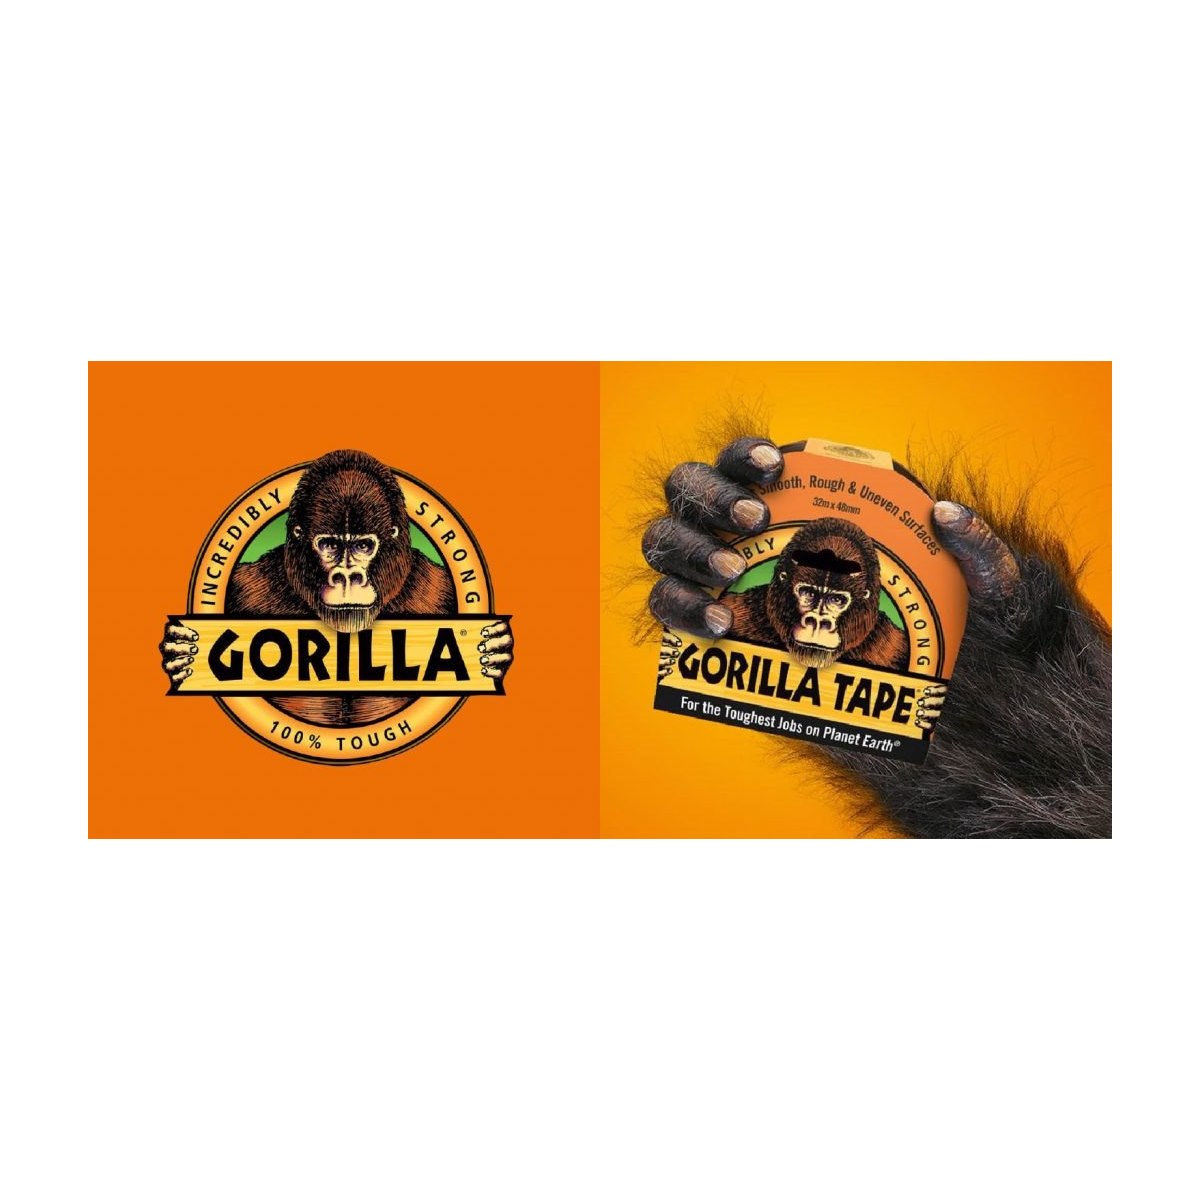 Where to Buy Gorilla Glue Products